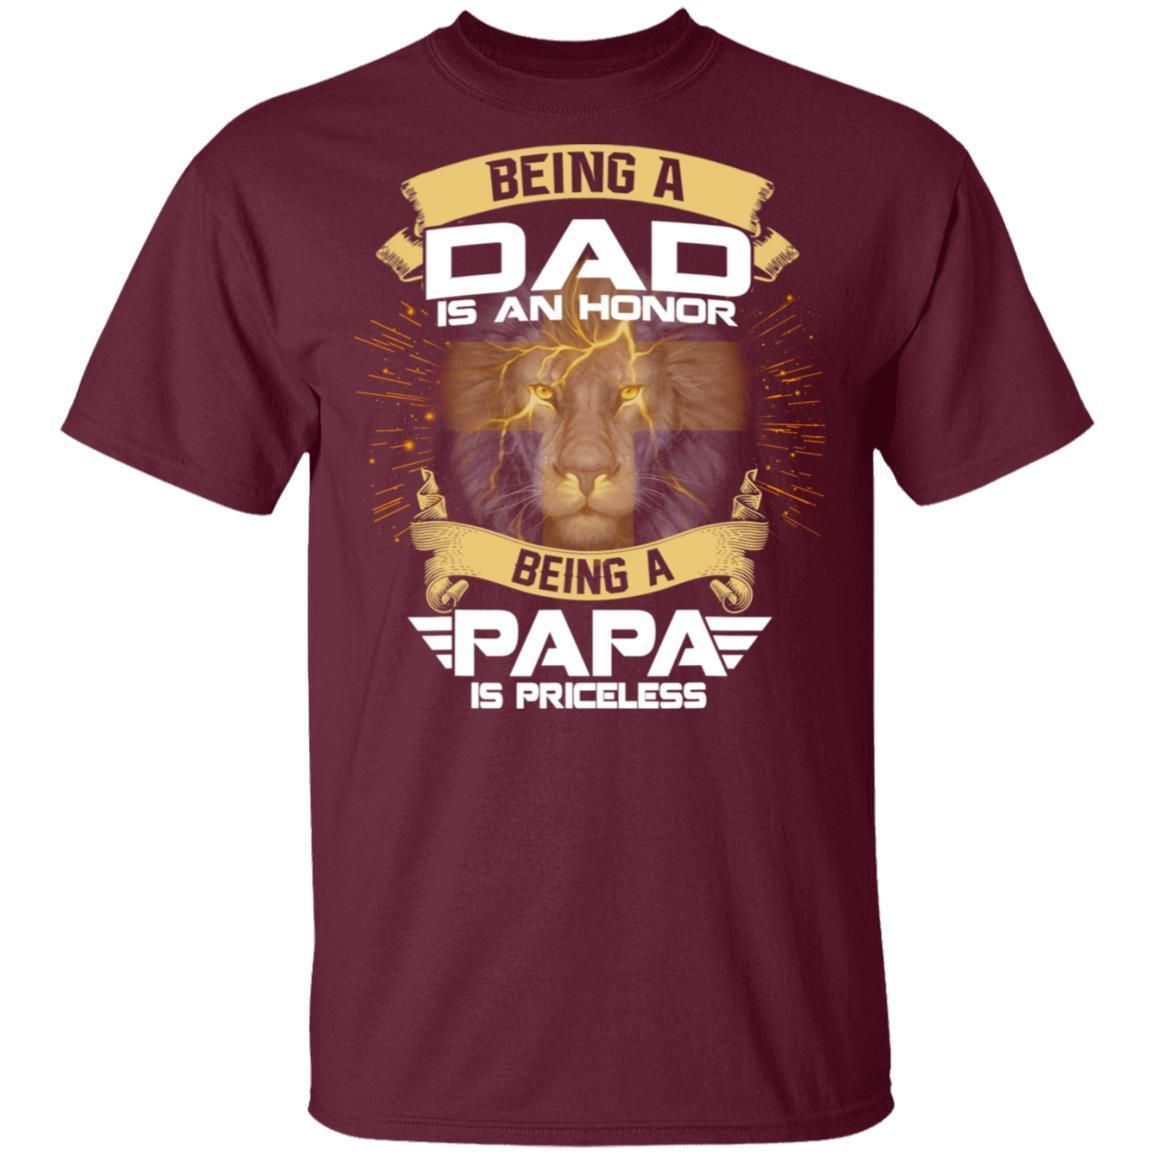 Being A Dad Is An Honor Being A Papa Is Priceless Lion shirts